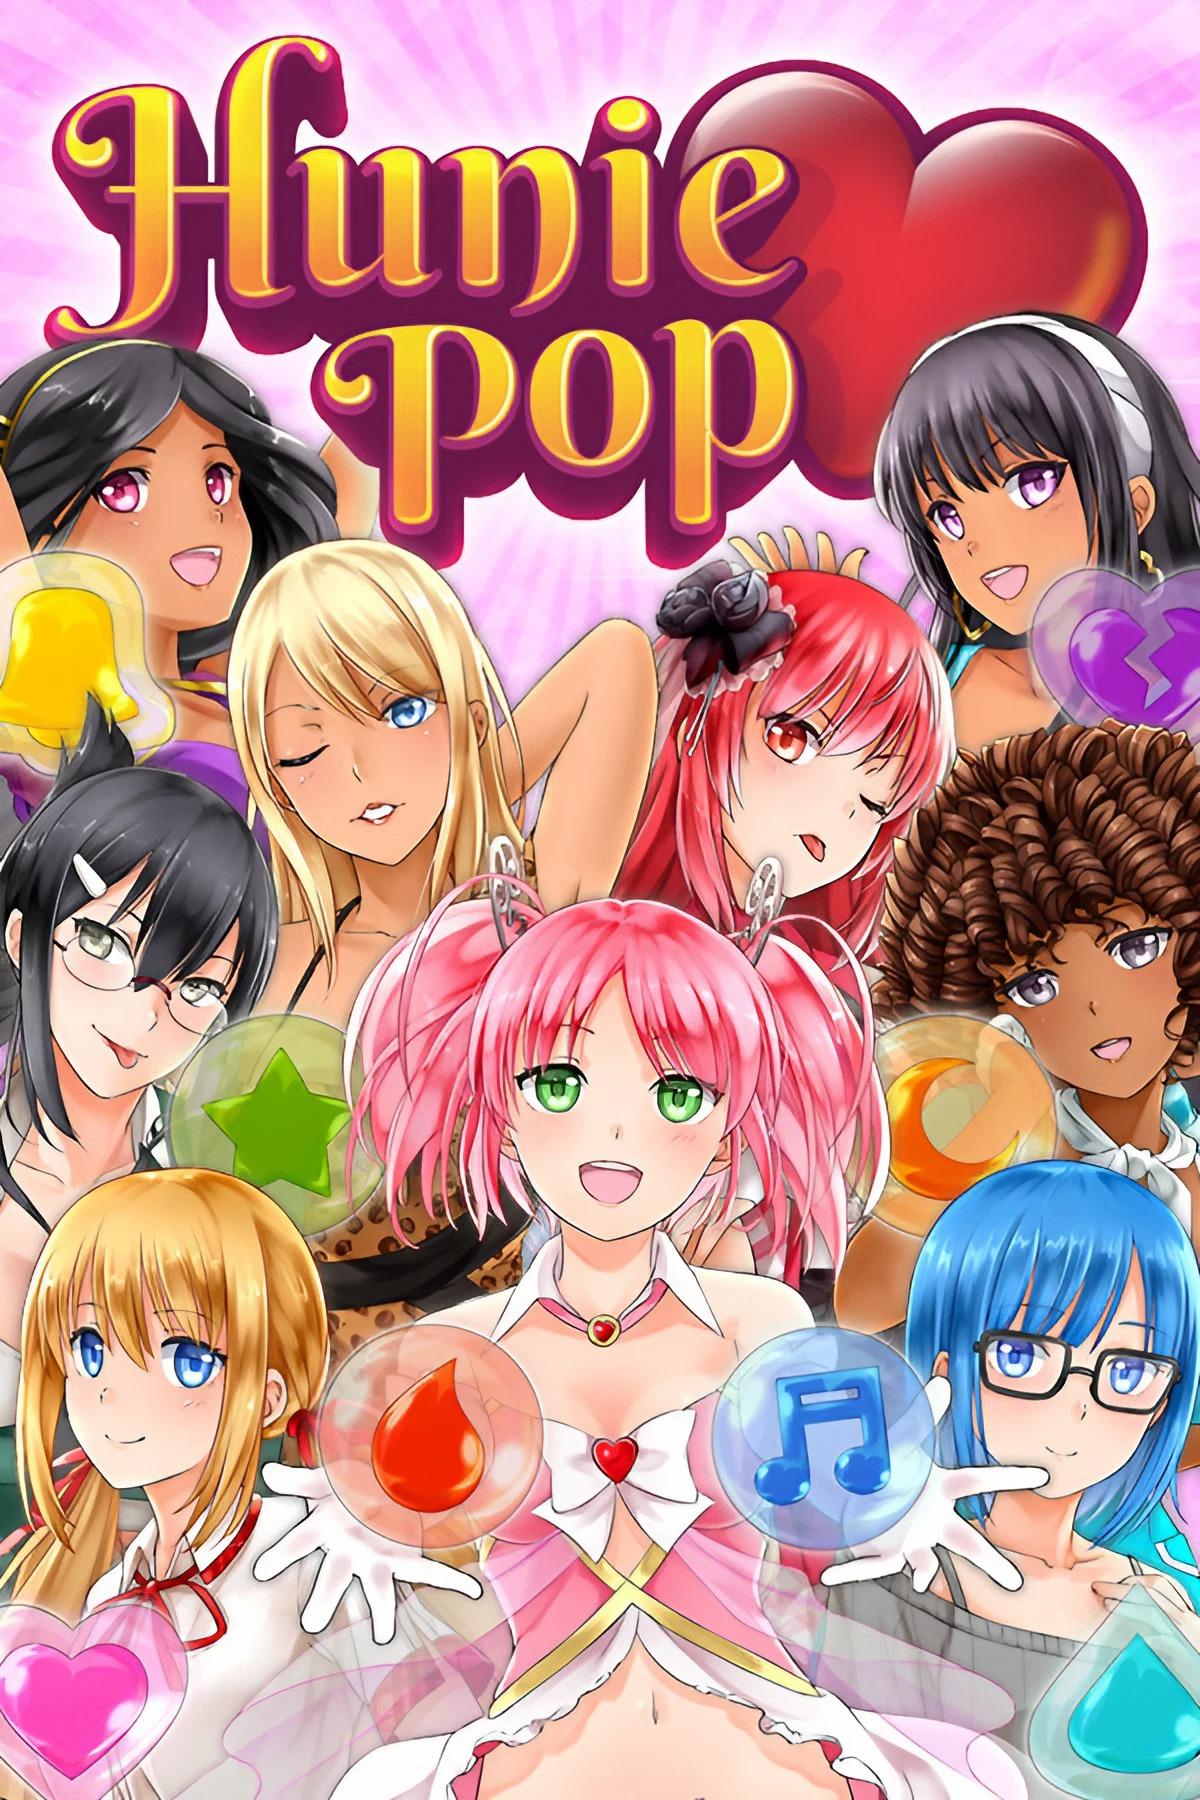 busisiwe kubeka recommends How To Uncensor Huniepop